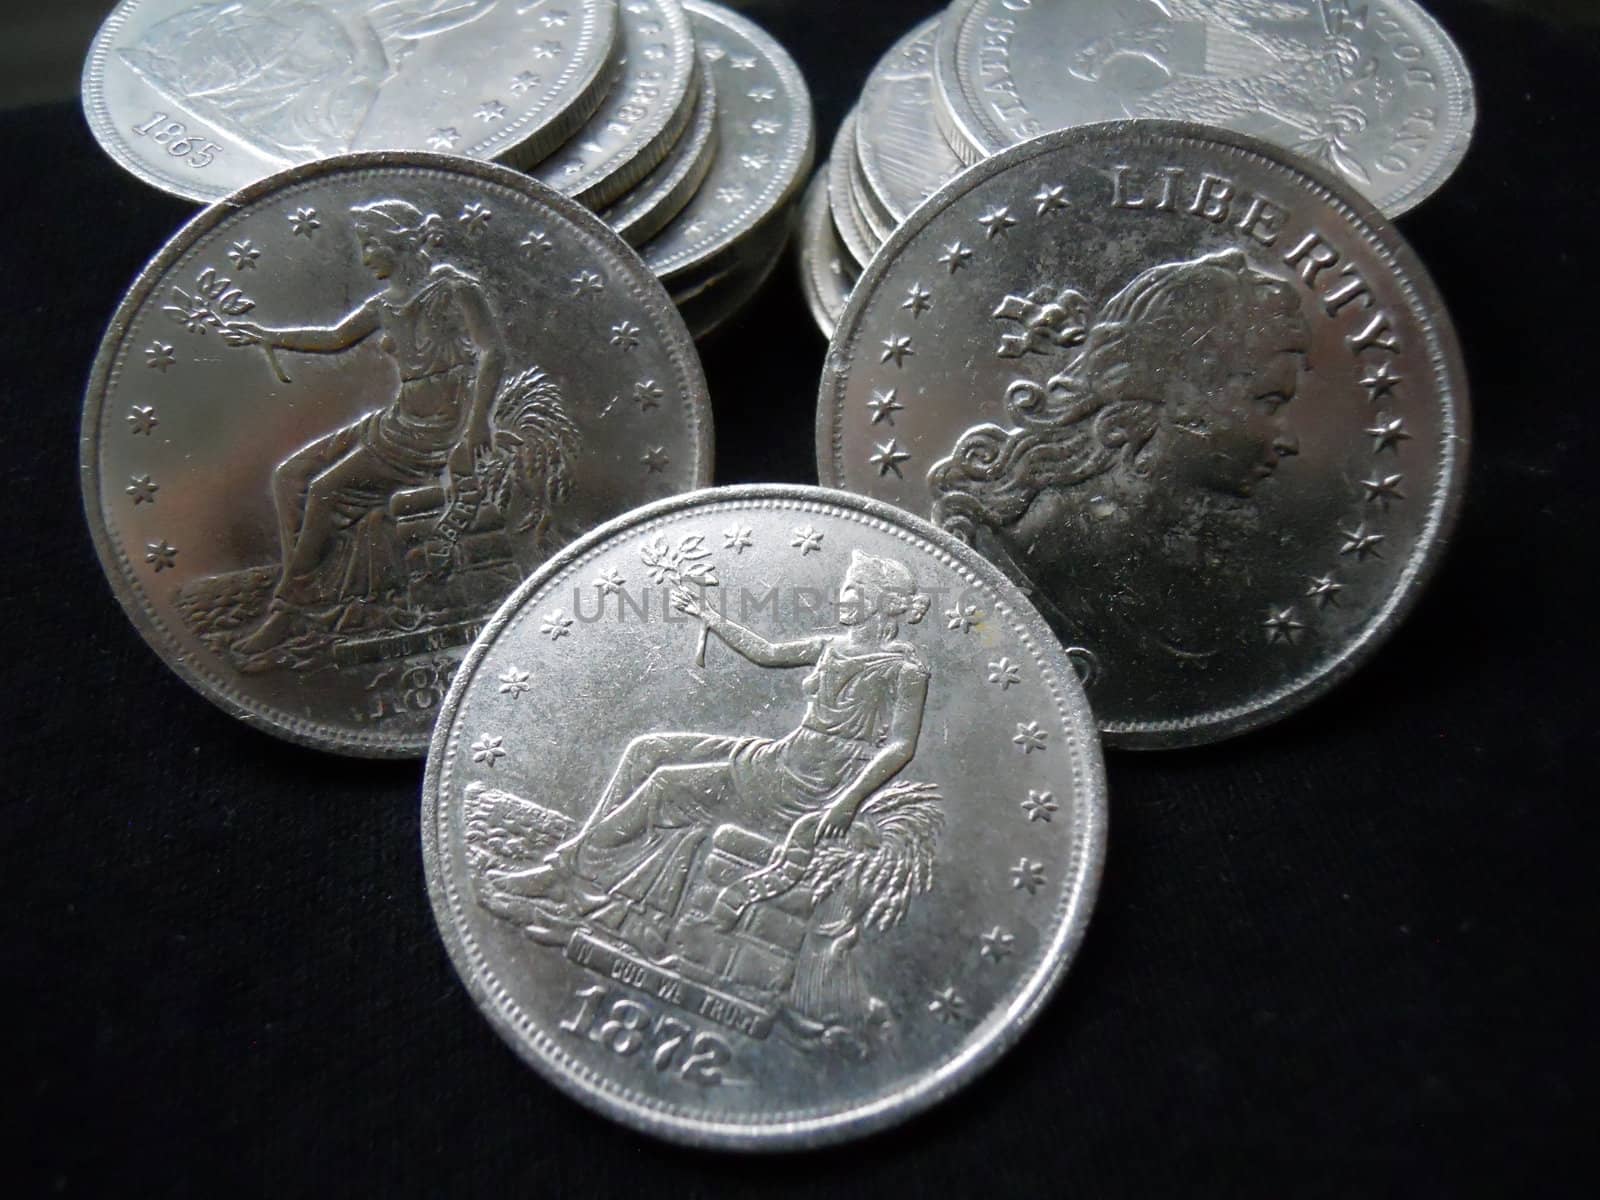 silver collectible coins by toady8